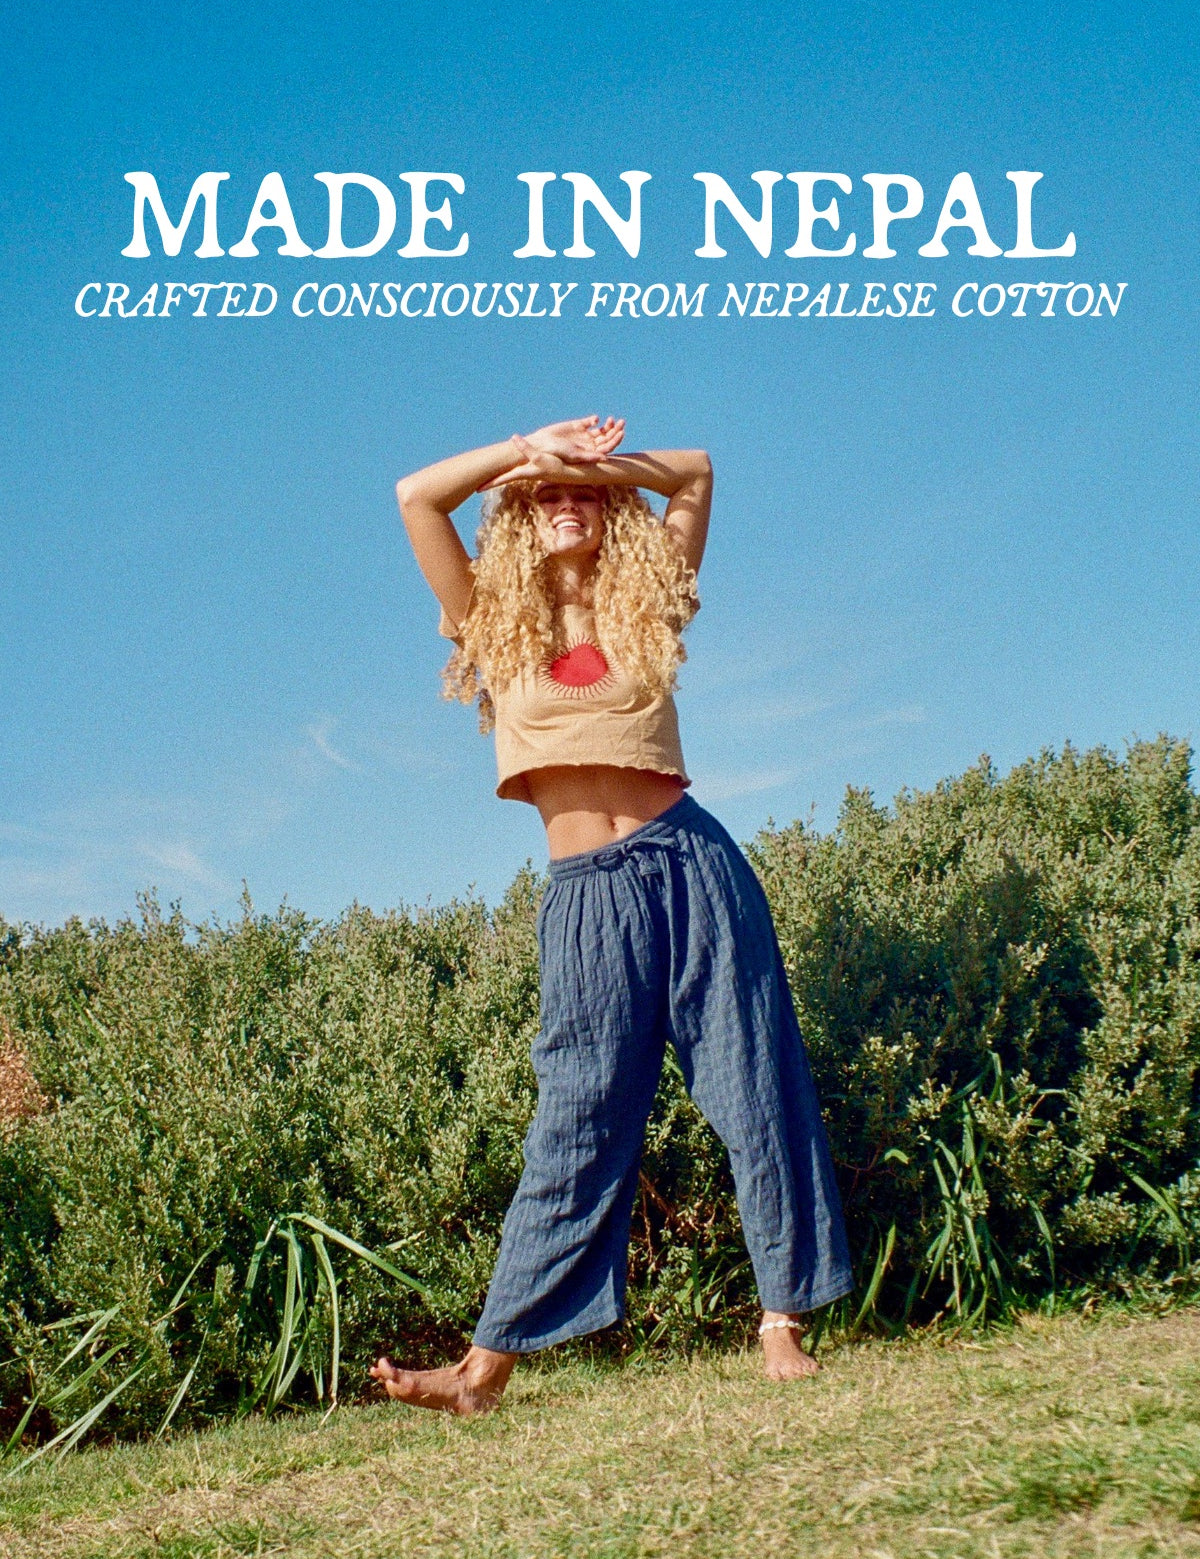 Made in Nepal